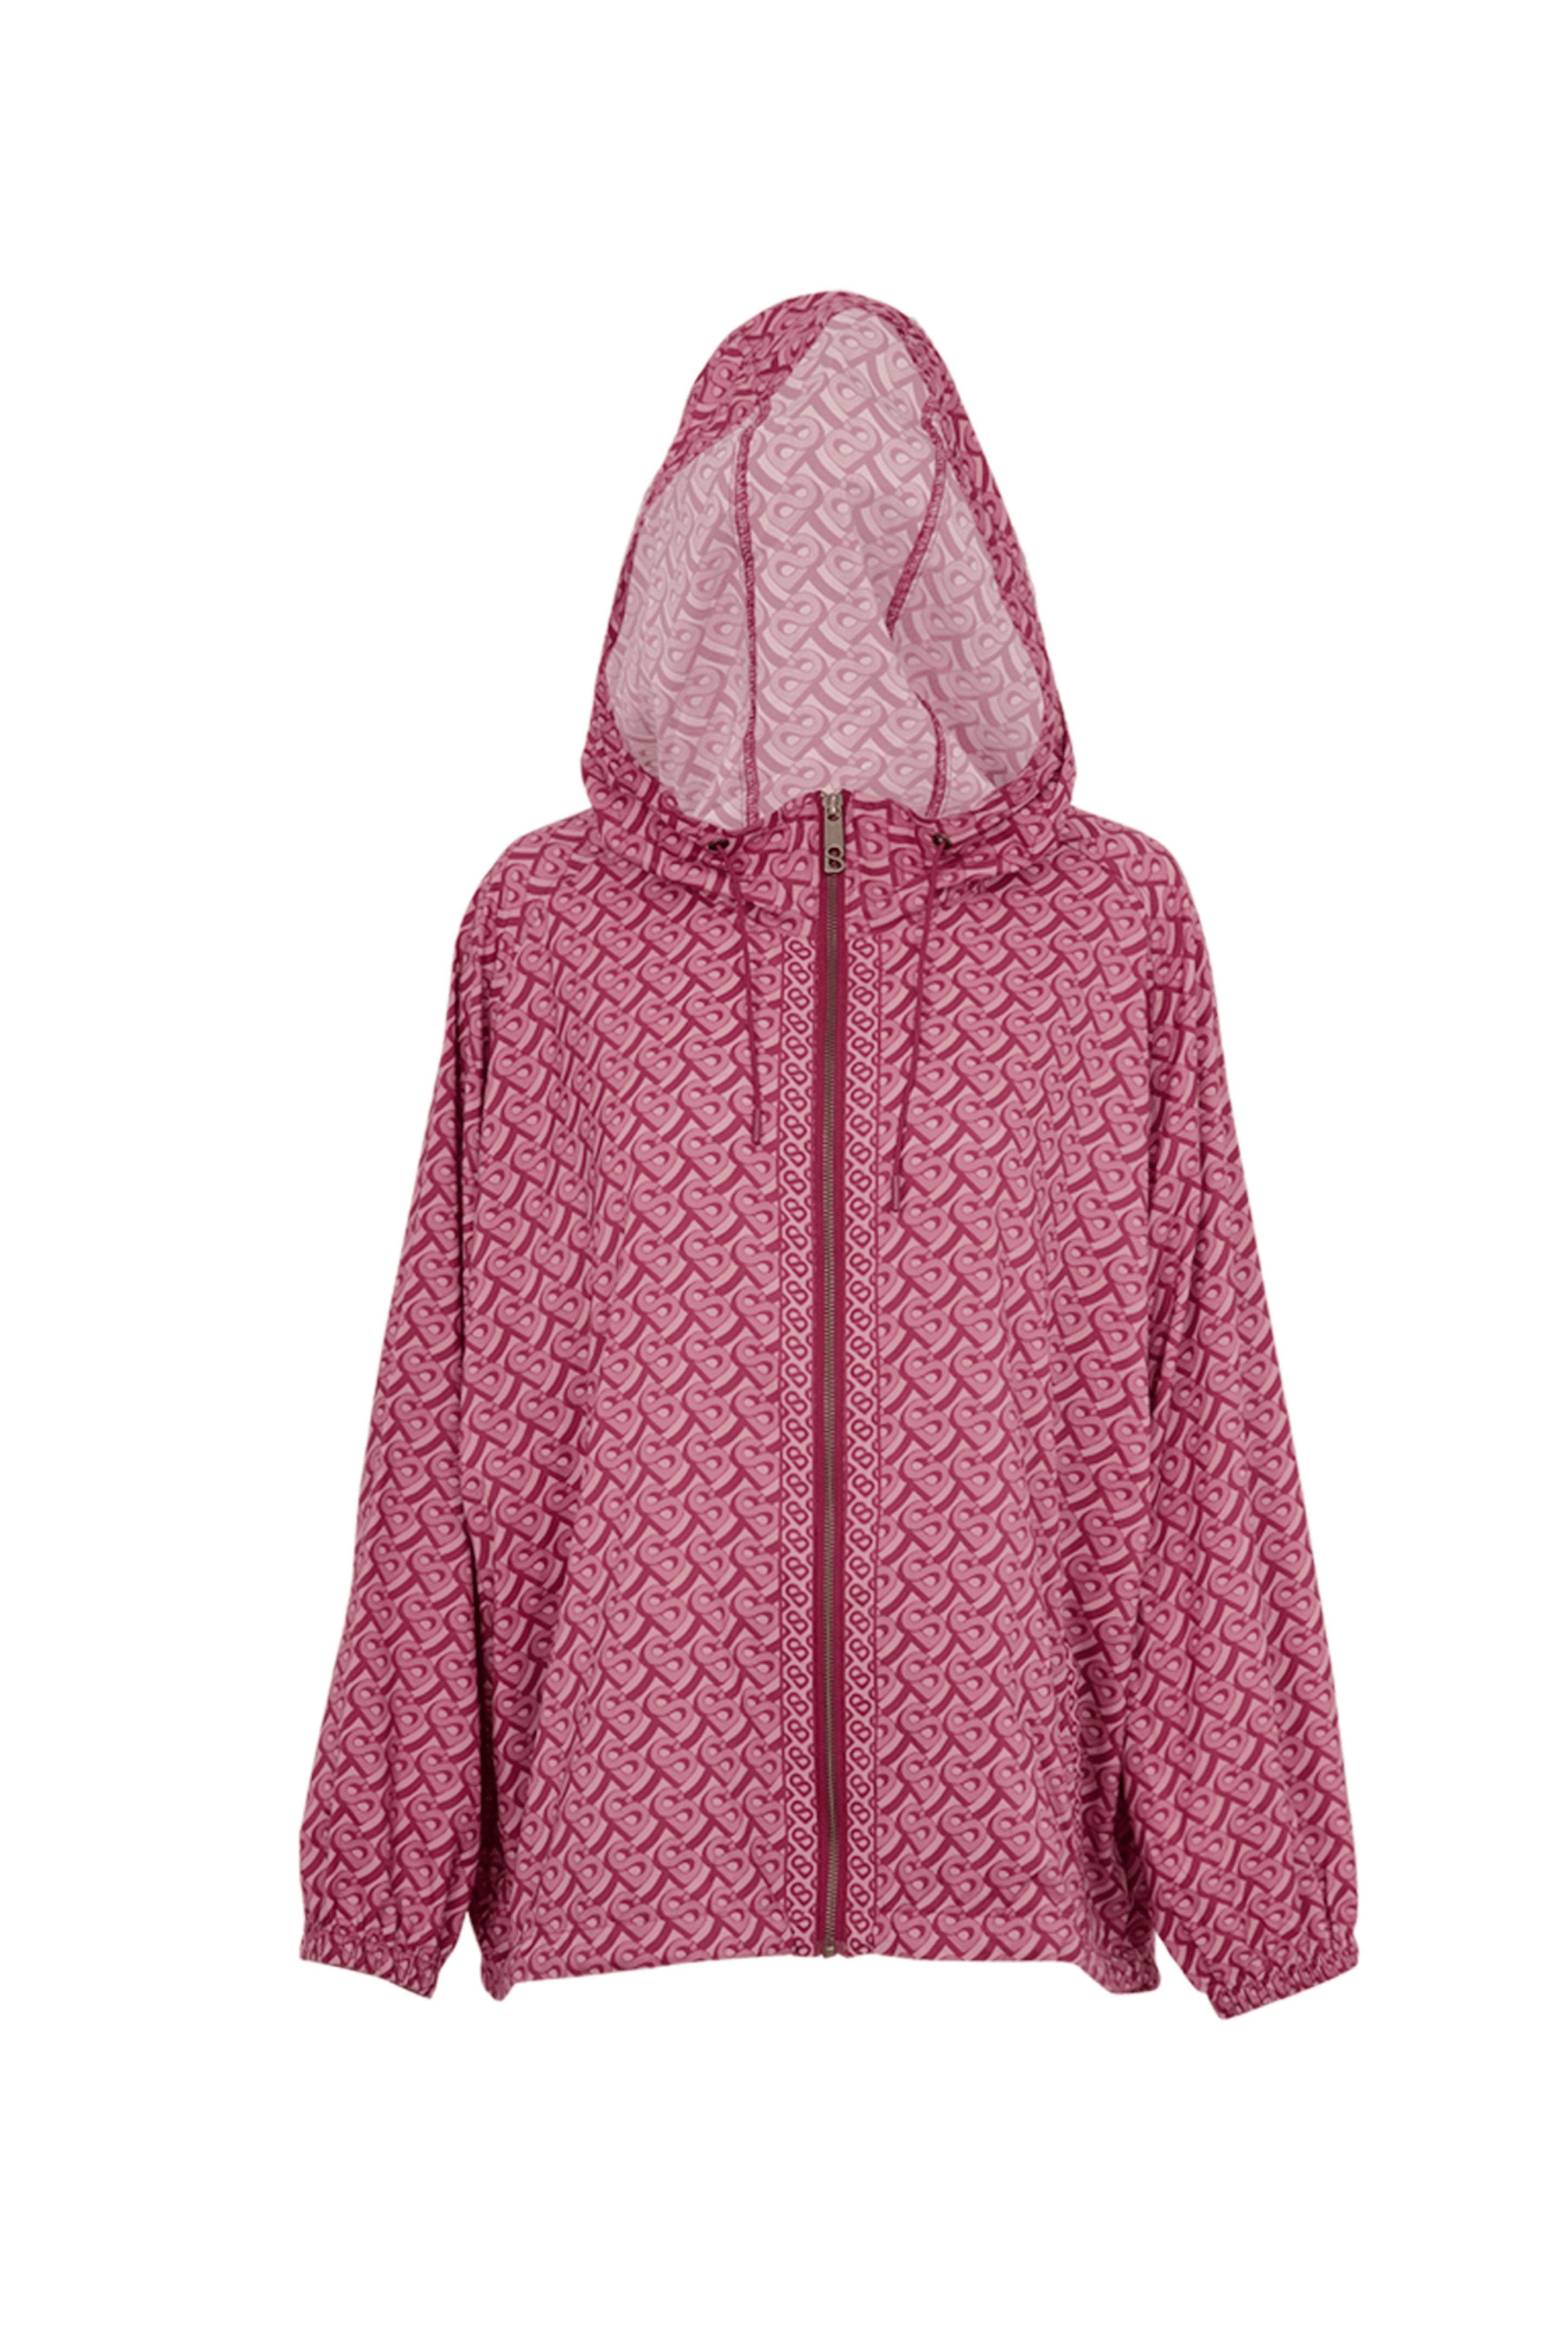 LAICA x Buttonscarves Athleisure Oversize Air Jacket - Magenta